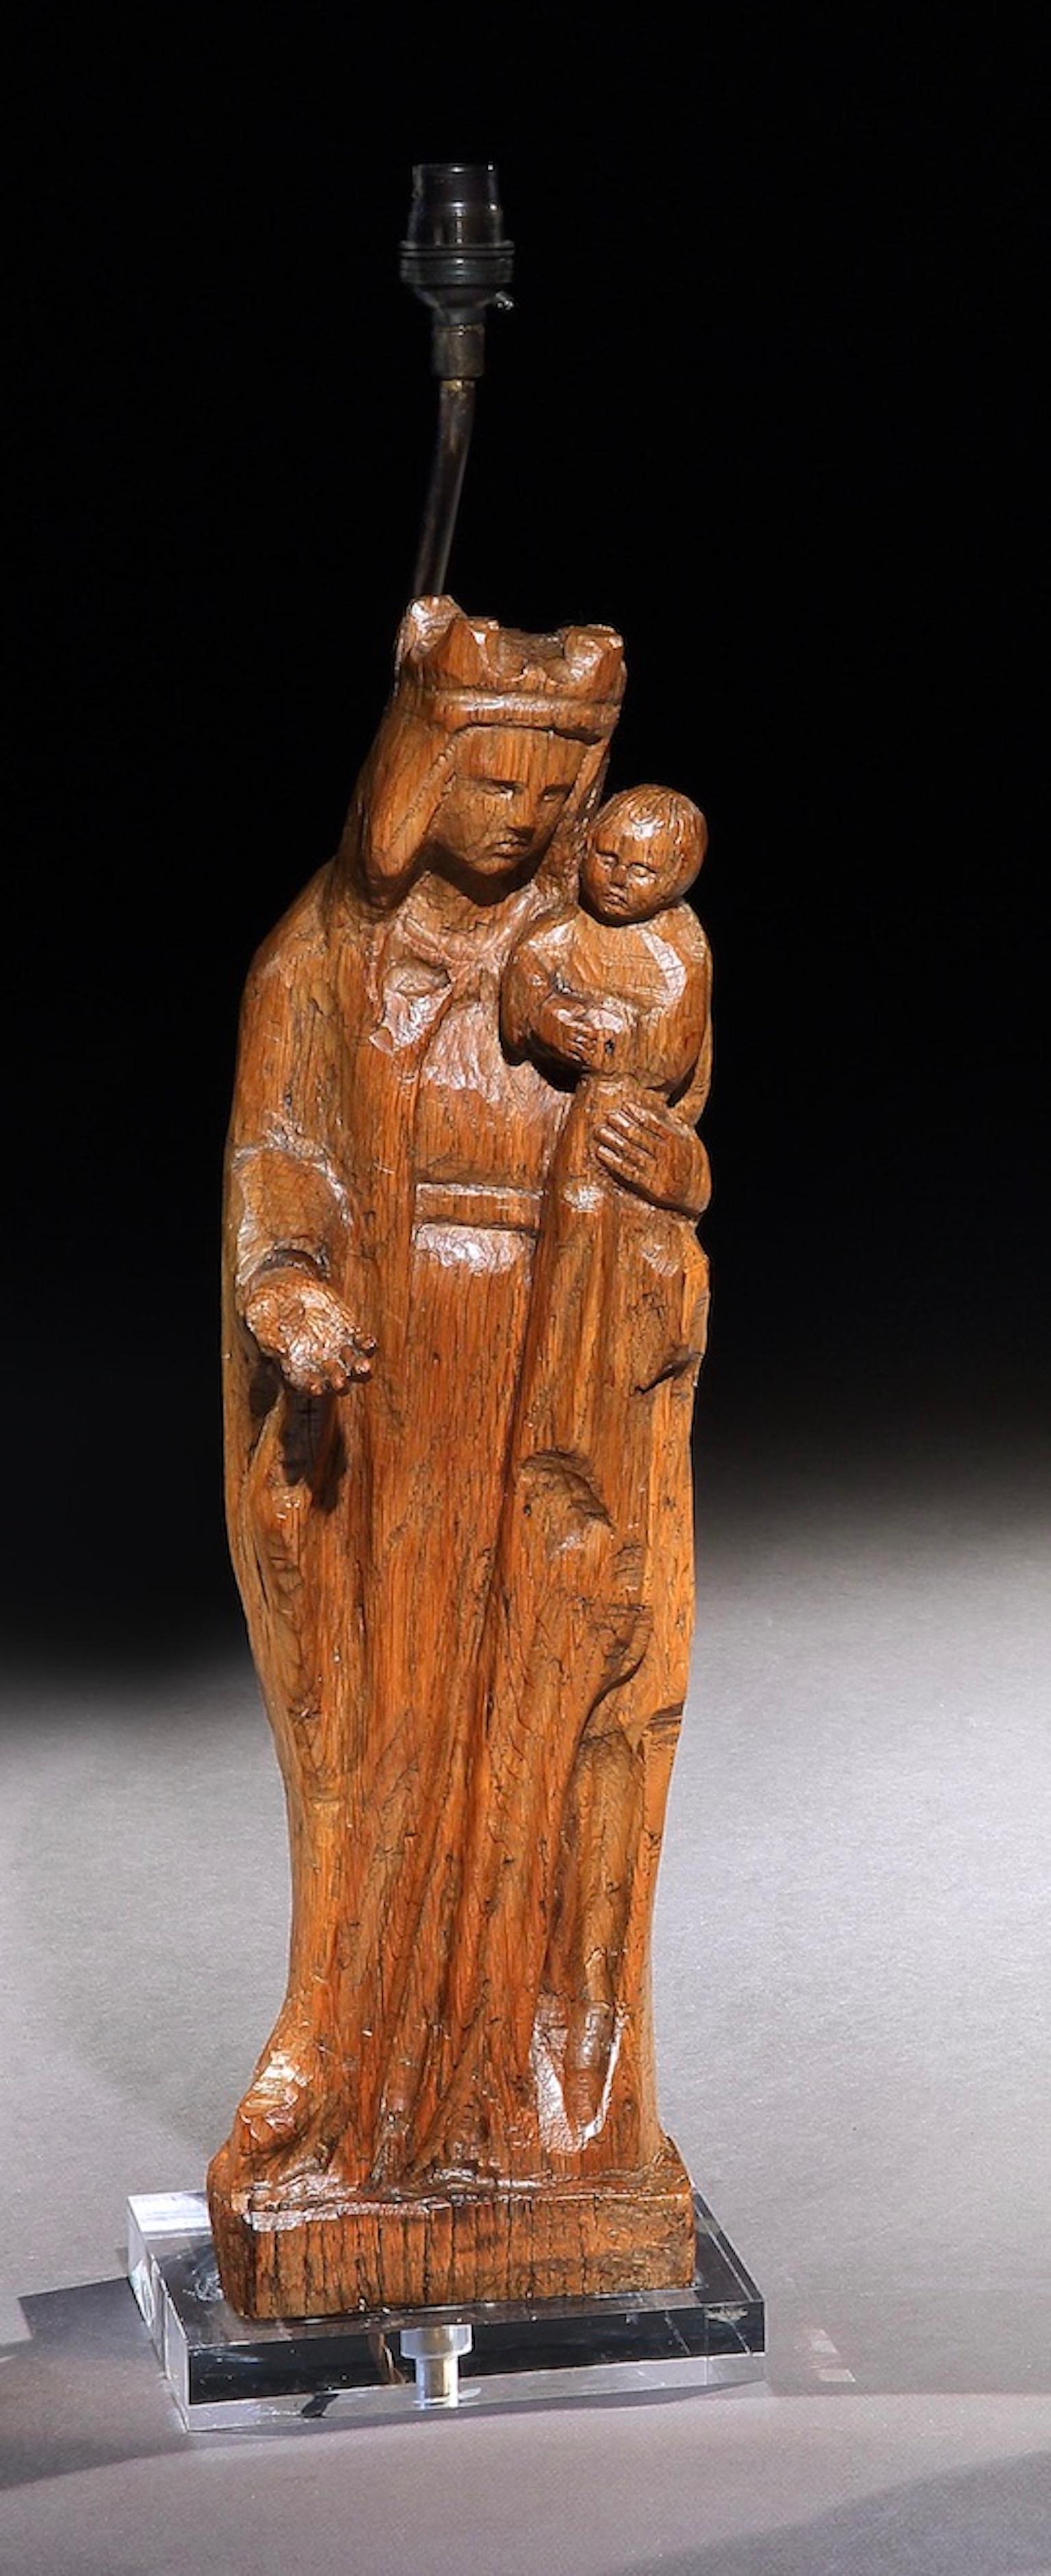 A Mother & Child, Naïve, Baroque, oak, sculpture, upcycled into a 25” high, table lamp

- Unusual statement & conversation piece; introducing an enduring classic theme into the interior
- The mother and child has been a strong symbolic motif of